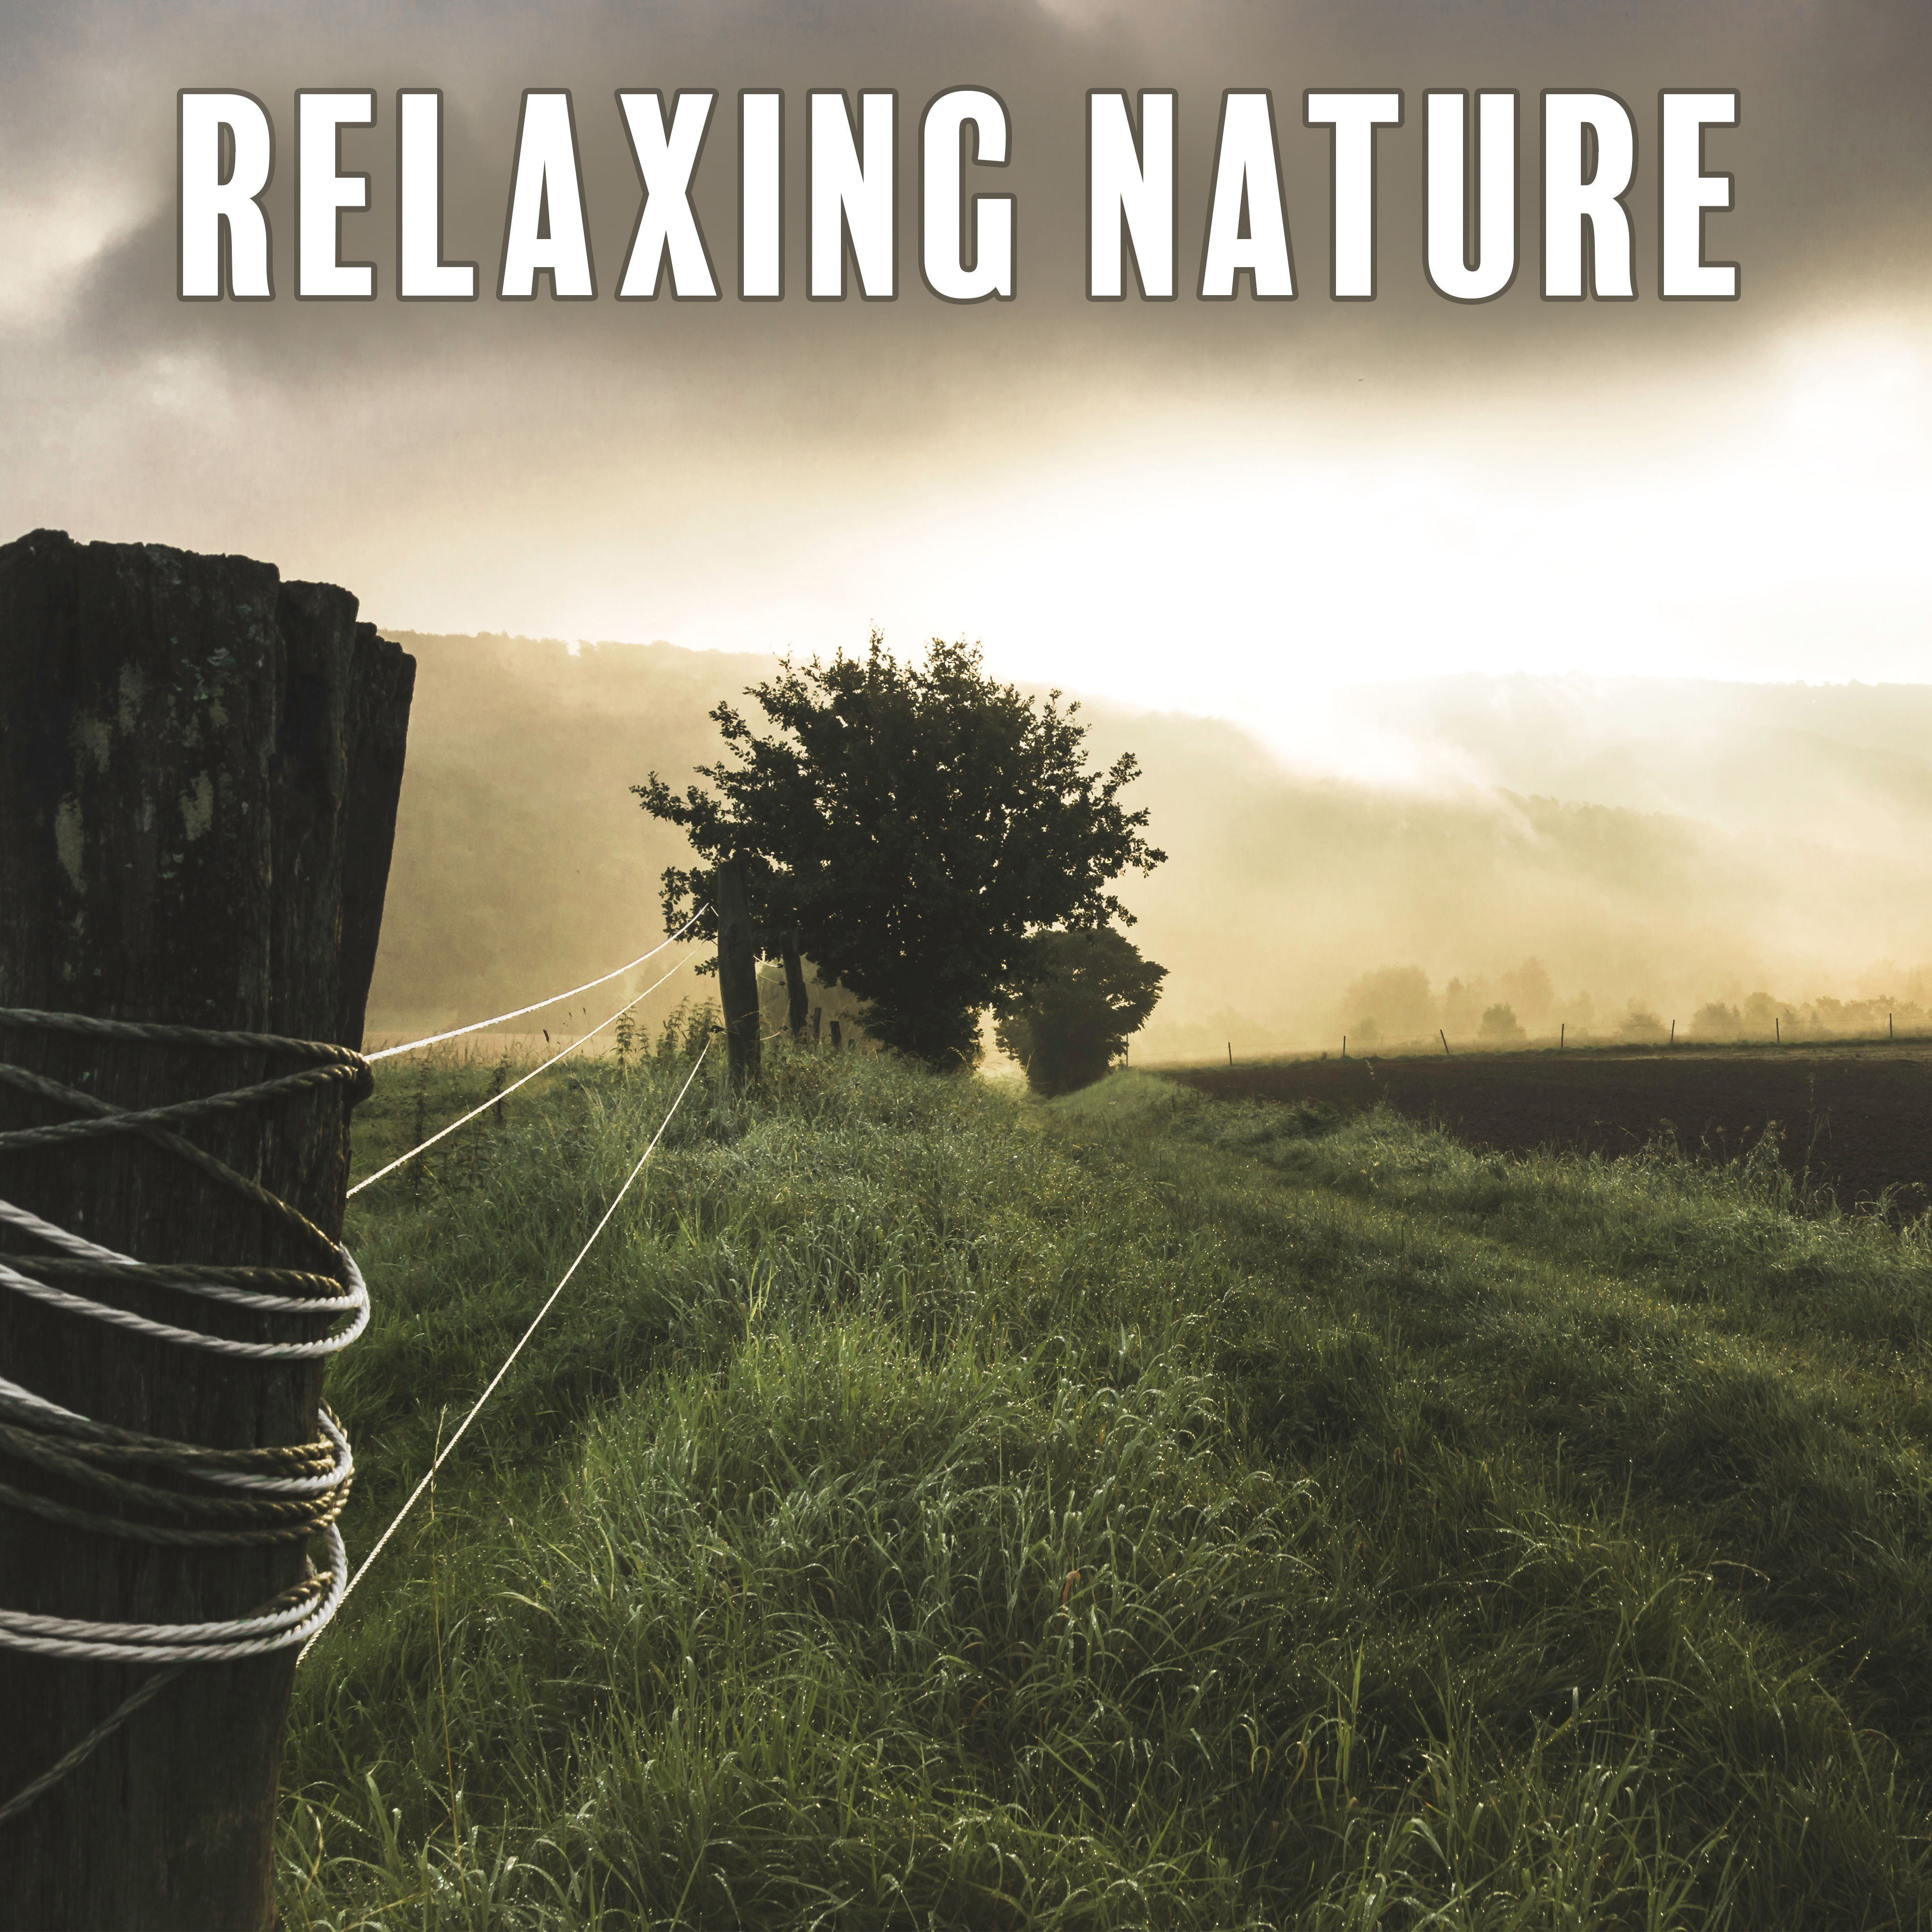 Relaxing Nature – Soft Music to Rest, Peaceful Mind, Soothing Guitar, Piano Music, Pure Relaxation, Relief, Calmness, Nature Sounds